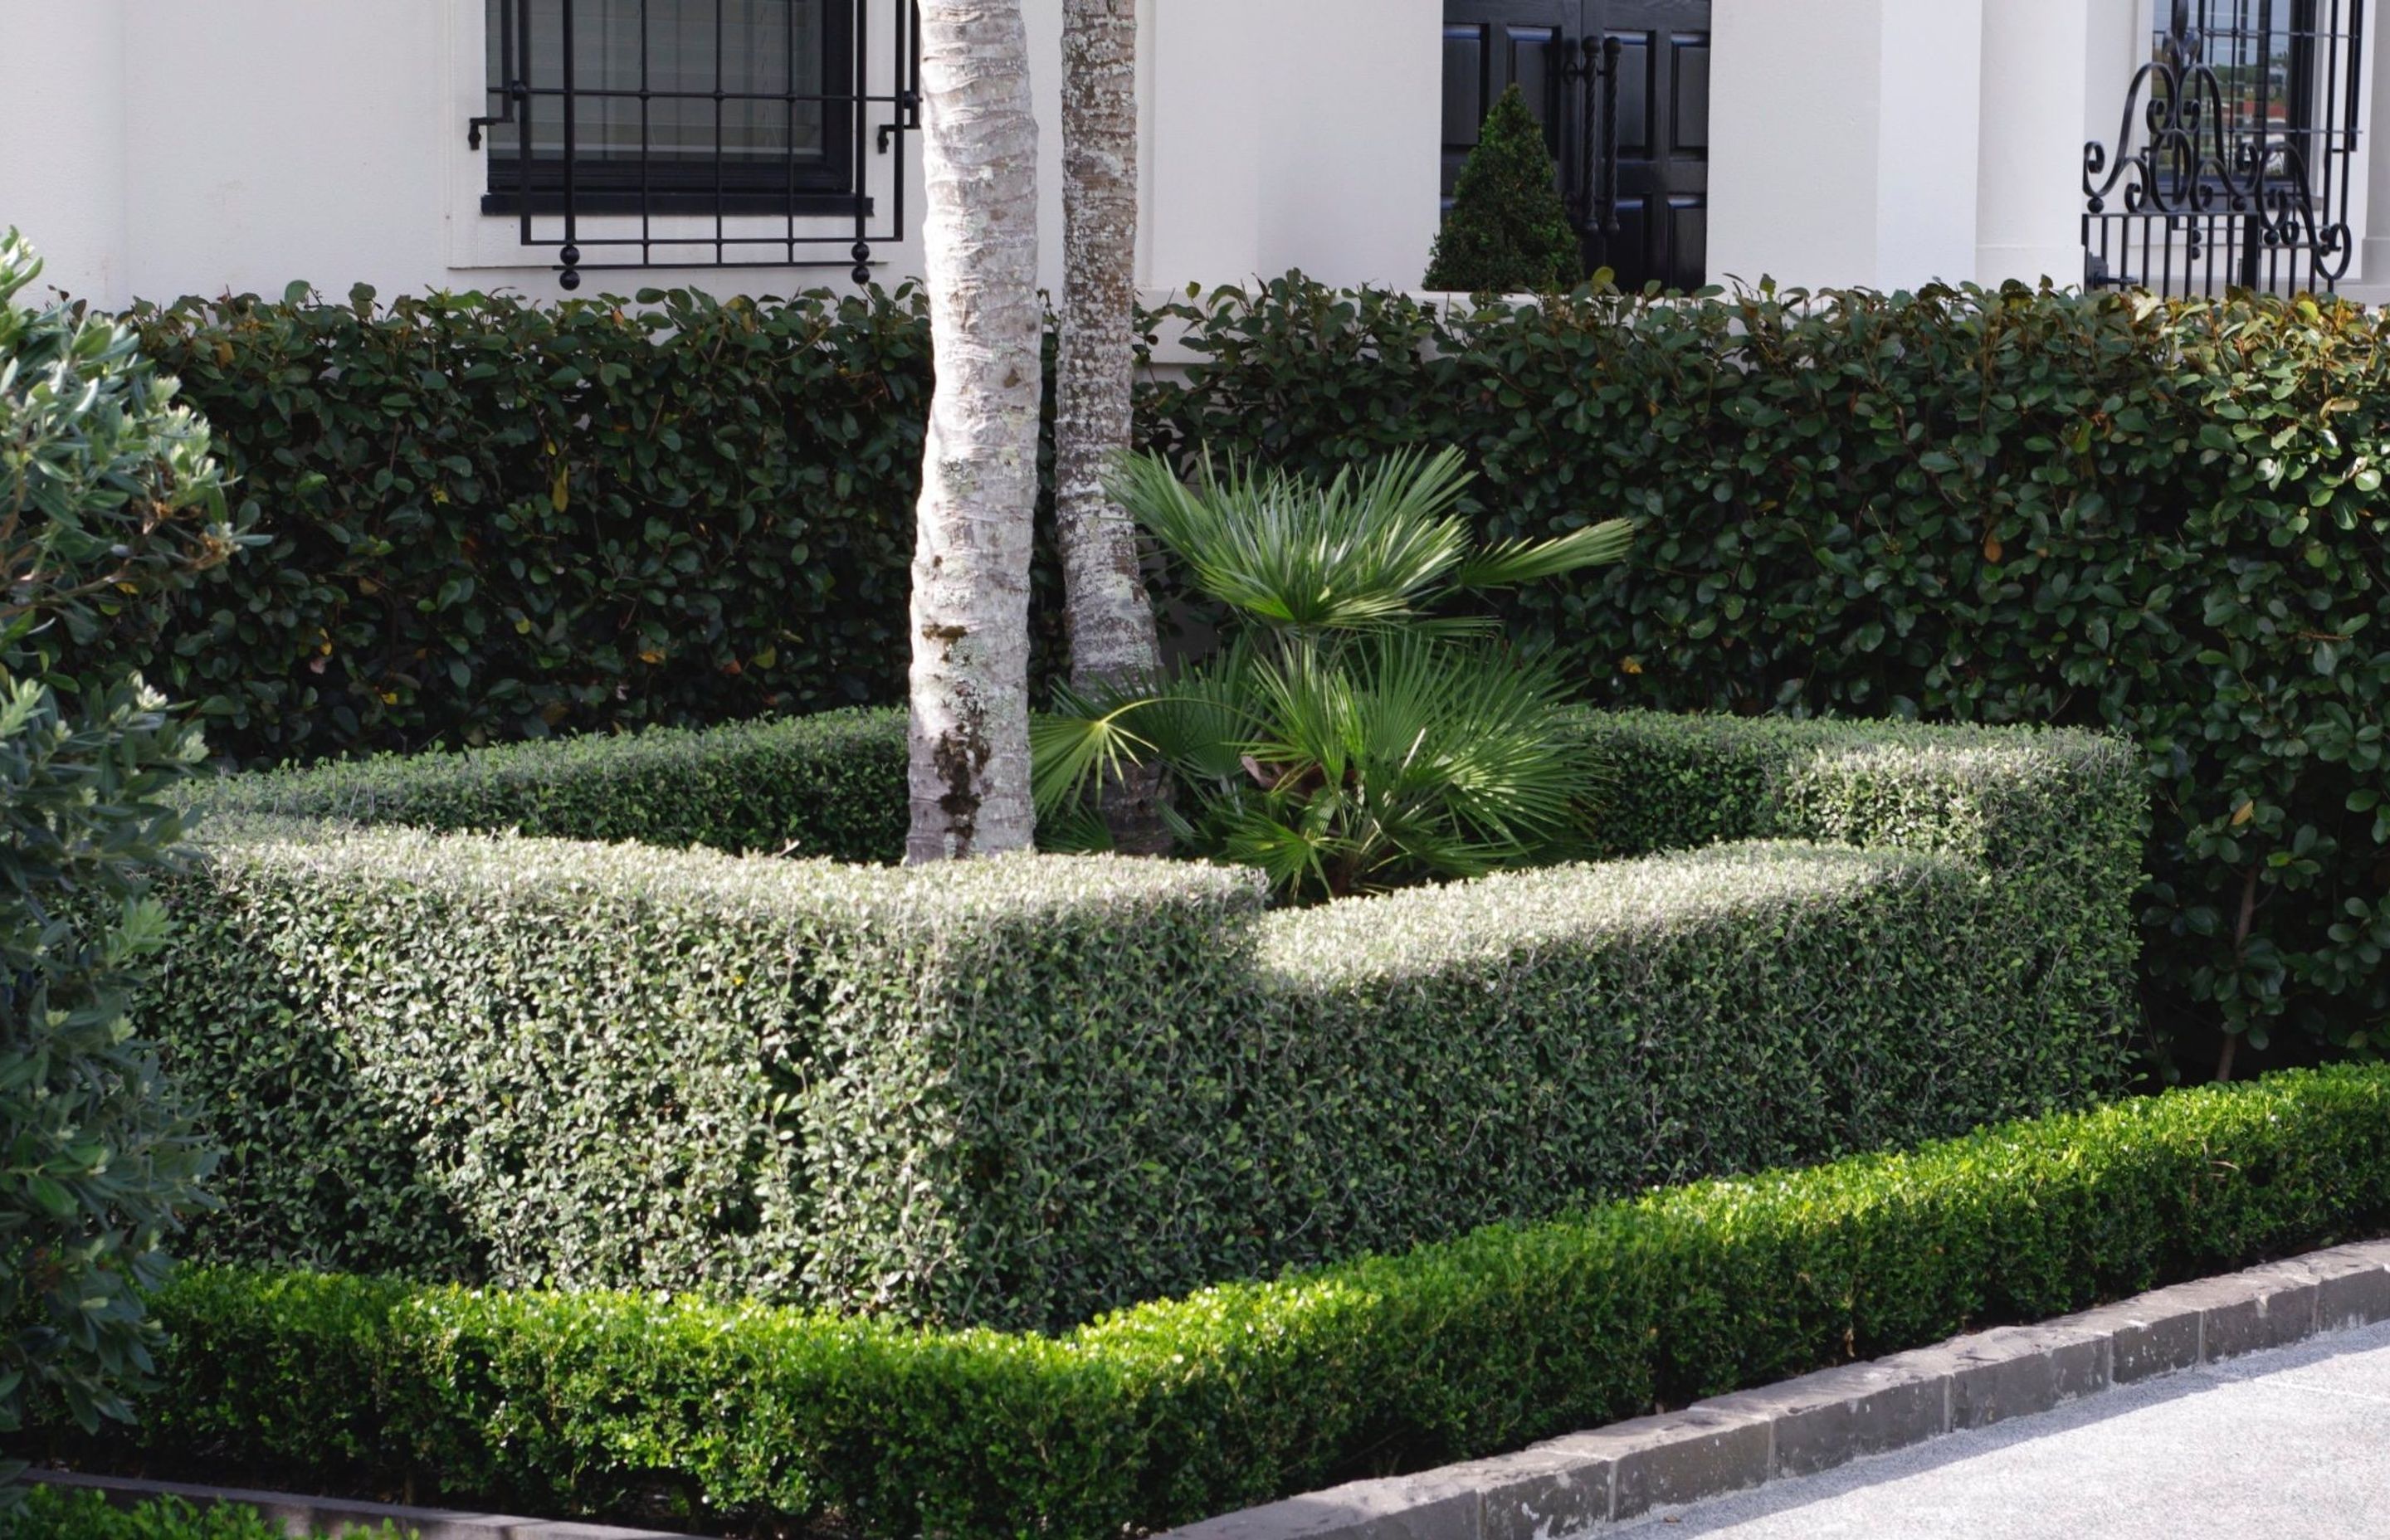 Project featuring Living Screen, Living Boundary, and Living Edge instant hedges